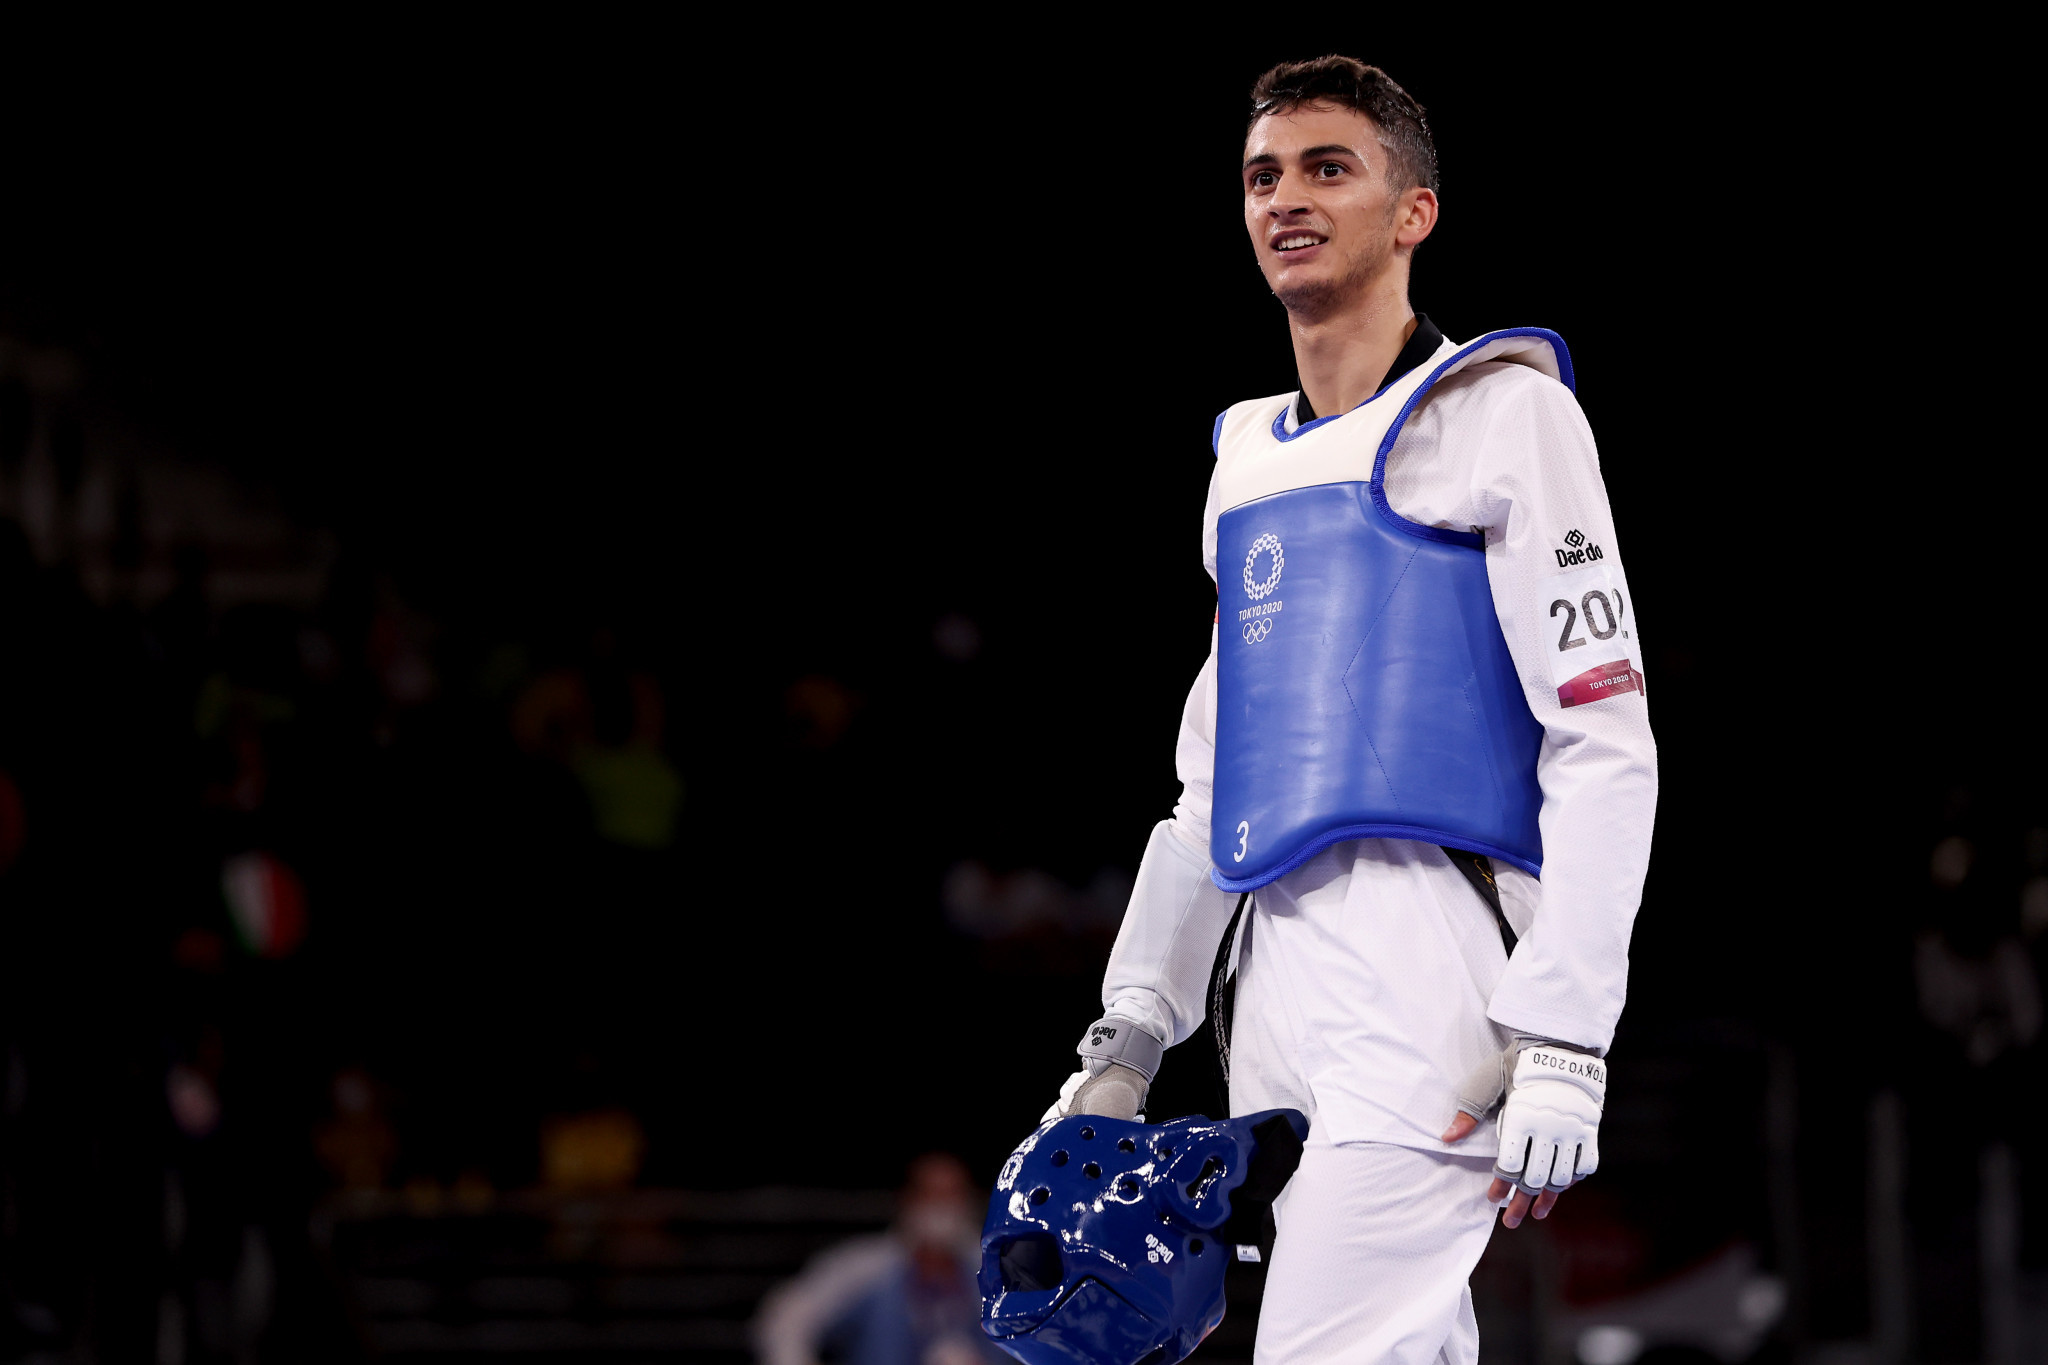 Olympic champions and strong home squad to star at World Taekwondo Grand Prix in Manchester